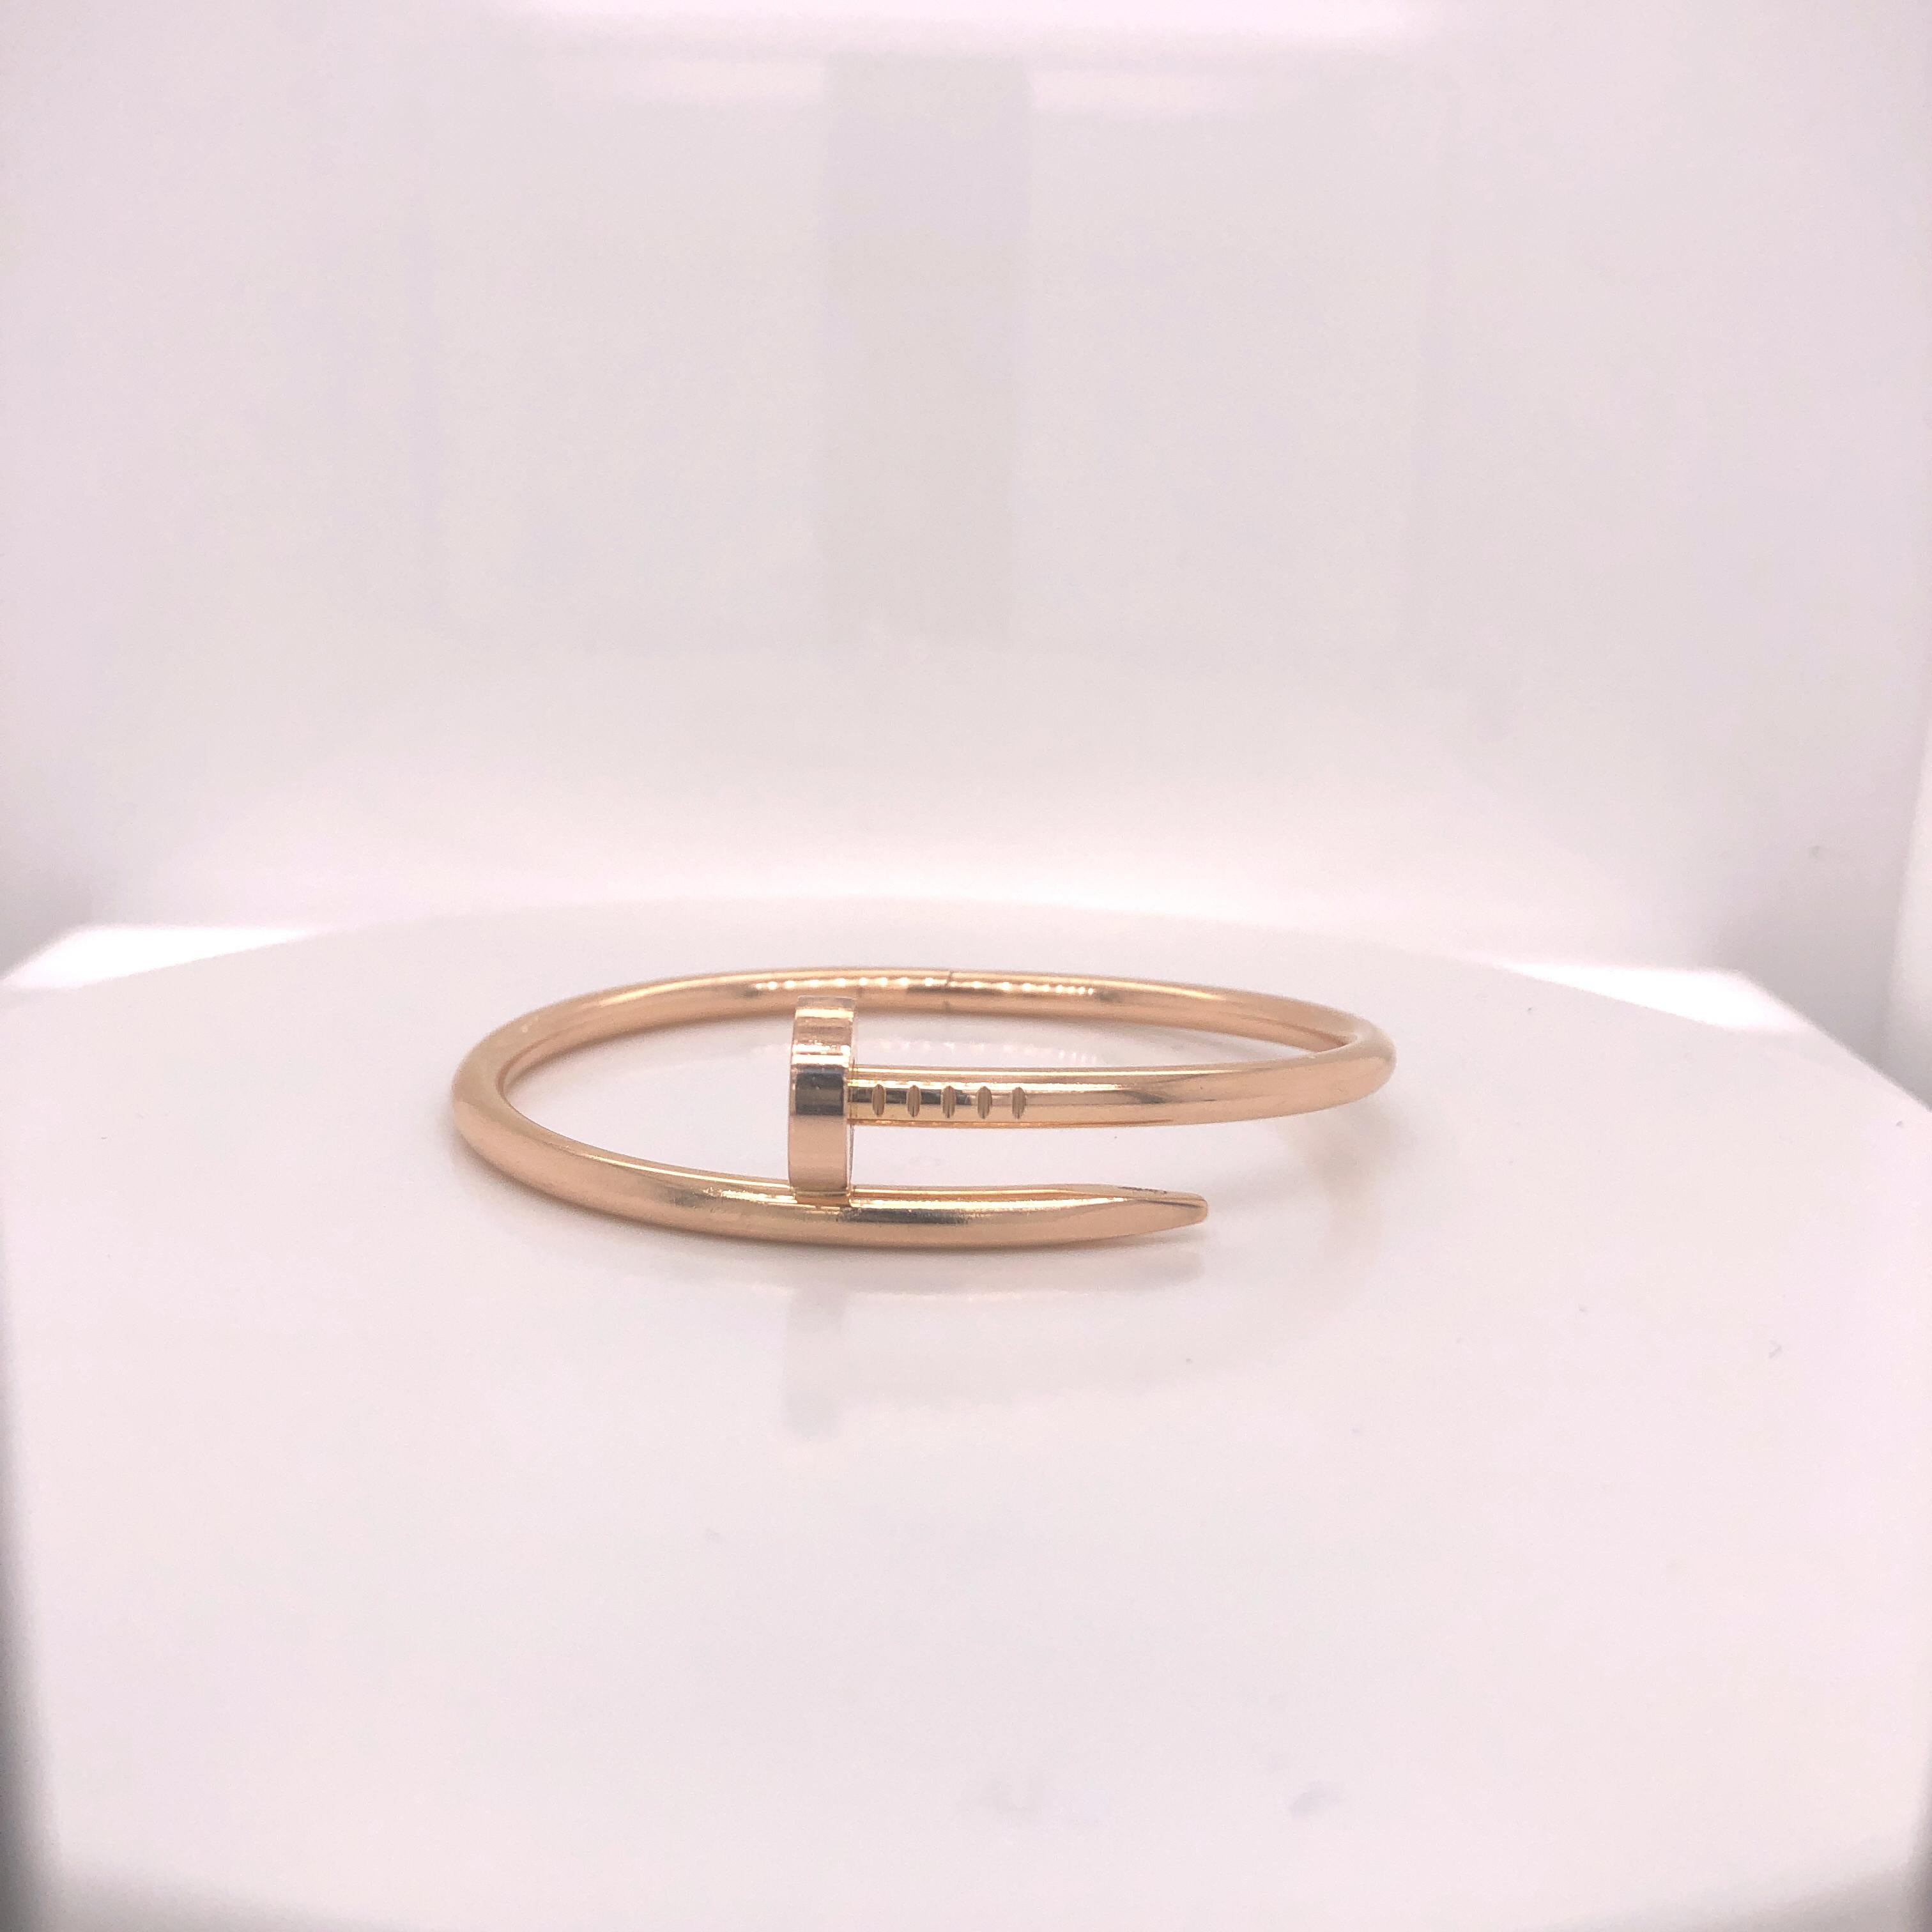 BRAND                                Cartier
CONDITION Never Worn
METAL Rose Gold
SIZE AND FIT Size: 16
FINAL SALE THIS ITEM IS FINAL SALE AND NOT RETURNABLE.
This Cartier Juste Un Clou Bracelet, featuring 18K rose gold, was designed in the 1970s